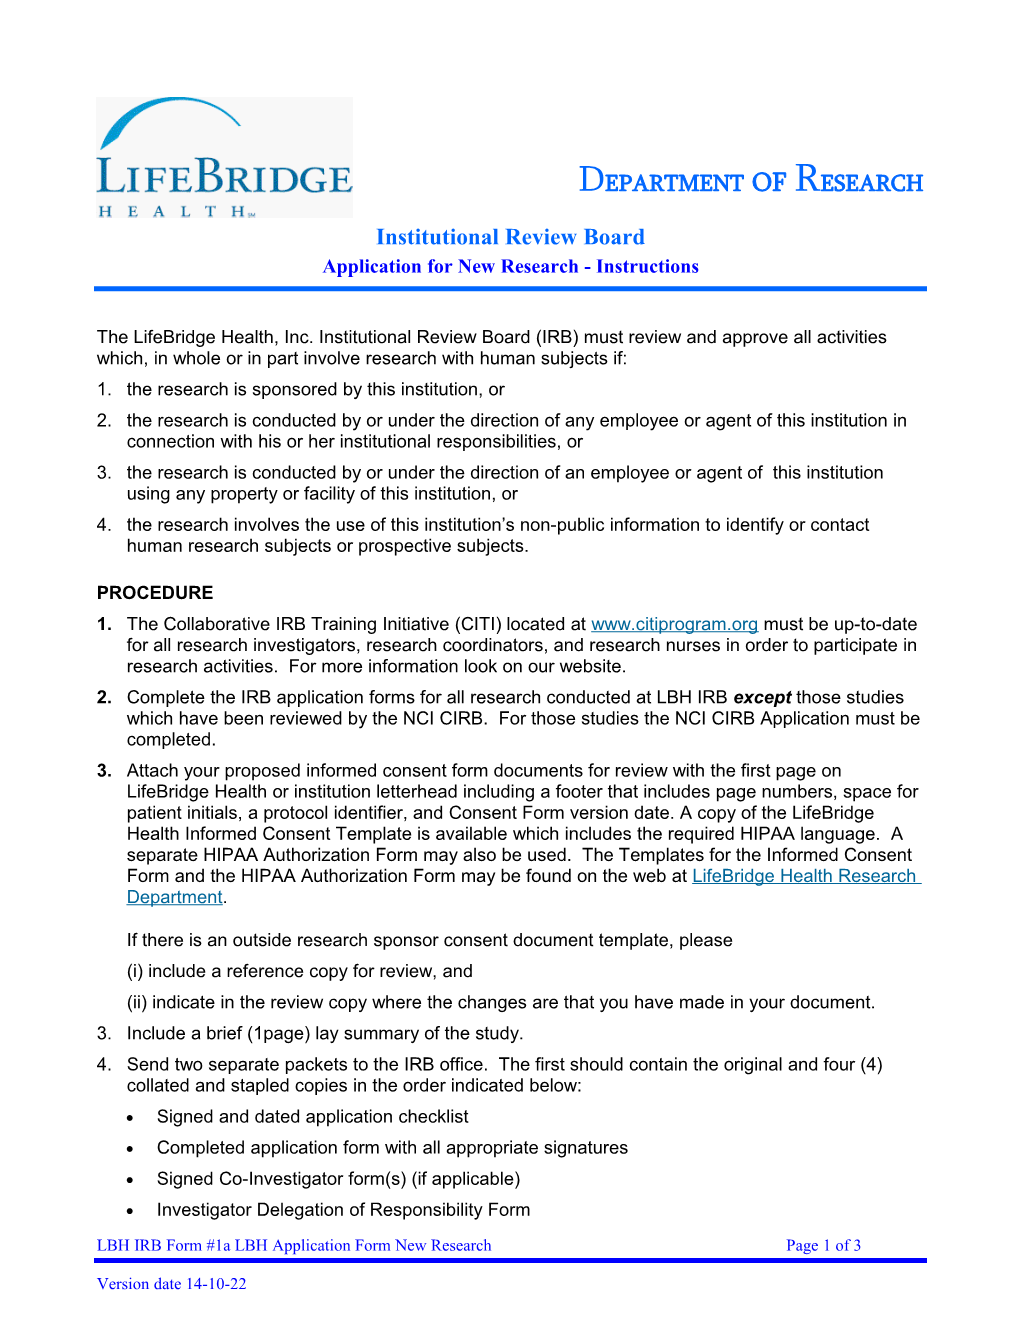 LBH IRB Form #1A LBH Application Form New Research Page 1 of 3